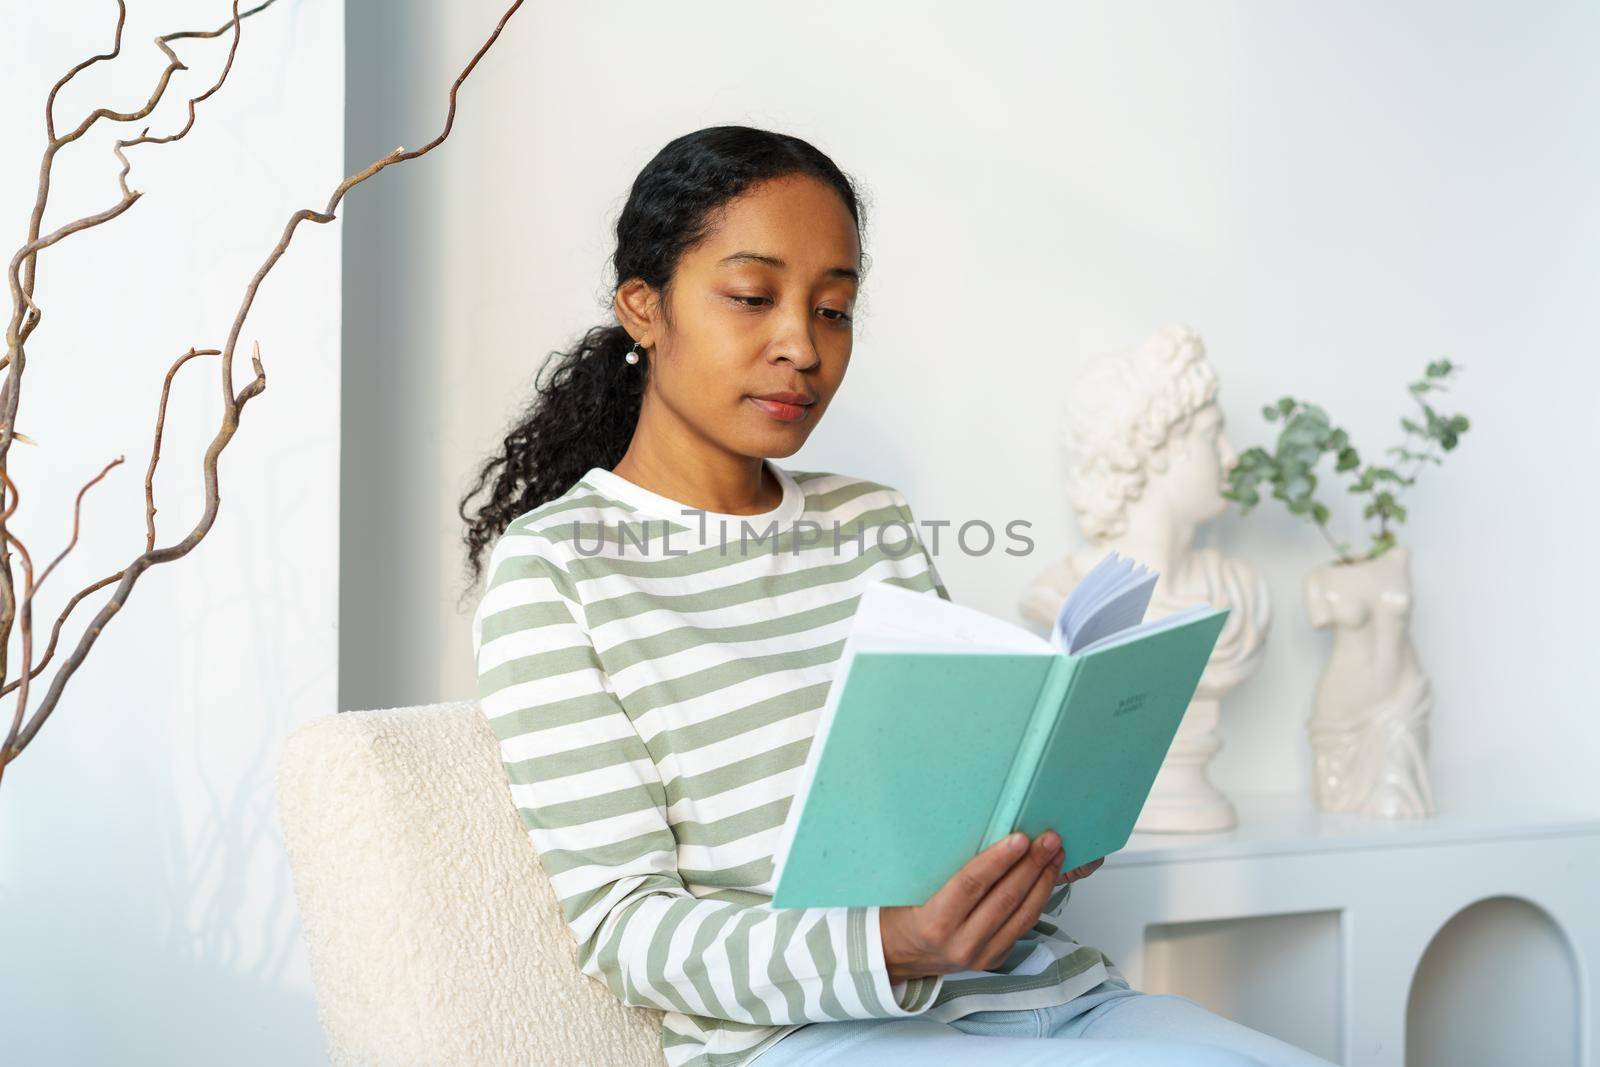 African-american female reading book in free time. Unplugged break. Slow paced lifestyle. Concept of modern young bookworm. Focusing on literature. Finding inspiration while relaxing